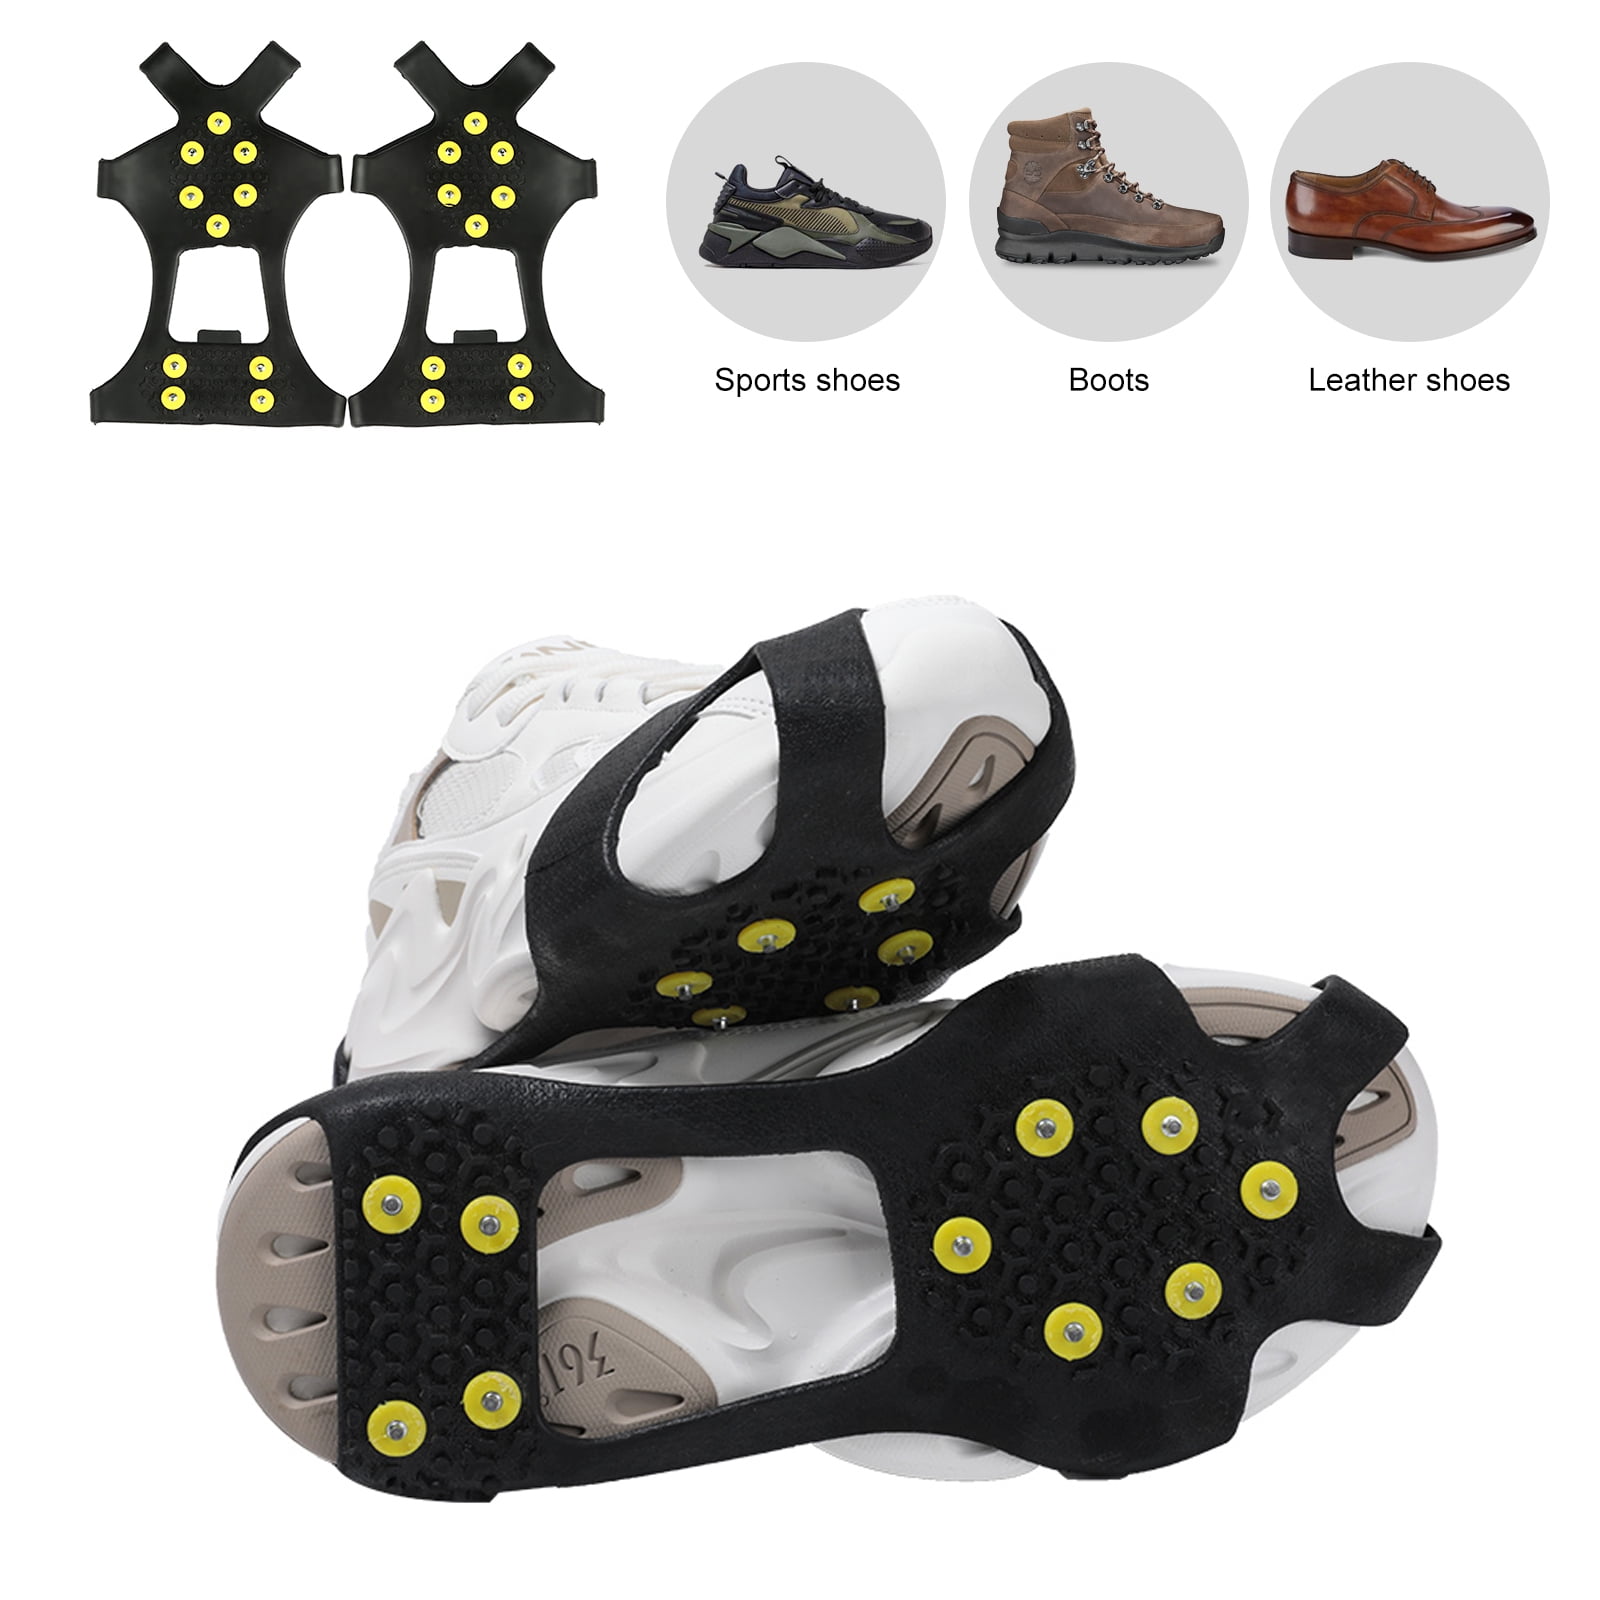 Glumes 2Pcs Non-Slip Shoe Cover Ice Snow Grips Over Shoe Boot Traction Cleat Rubber Spikes Anti Slip Mountaineering Non-Slip Shoe Cover 10-Stud Slip-on Stretch Footwear 